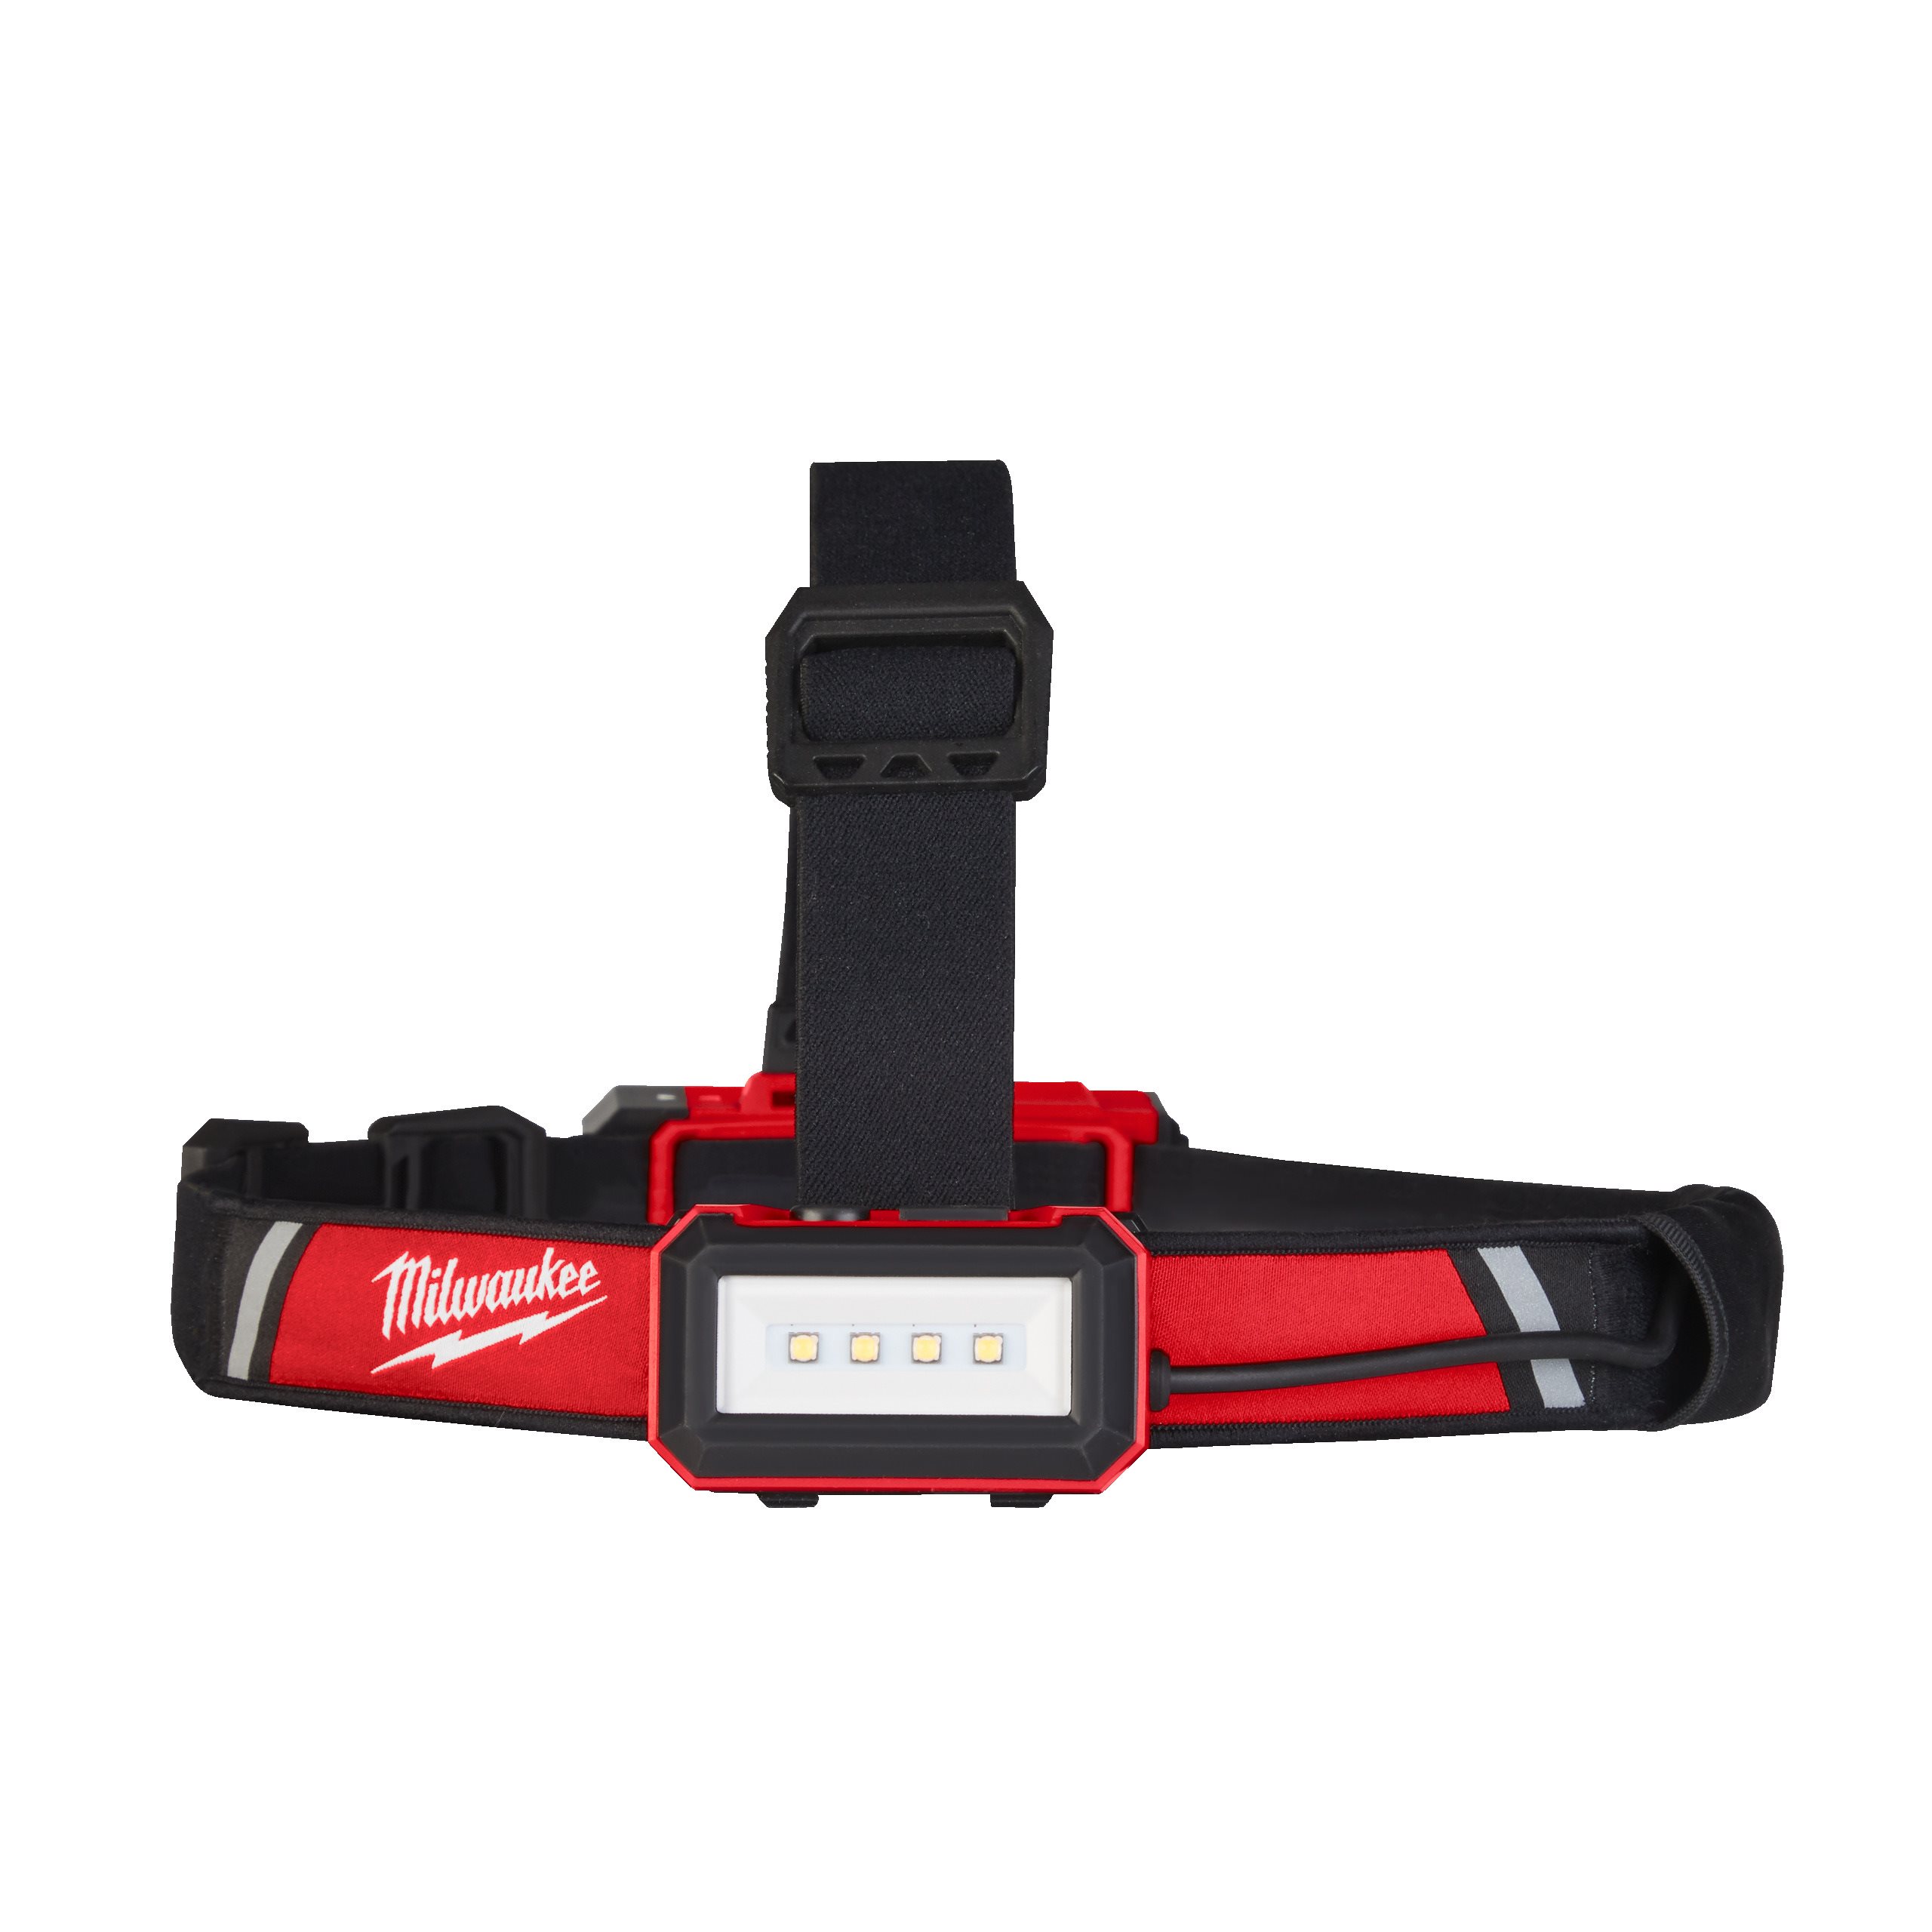 Milwaukee 475-Lumens LED HEADLAMP USB-RECHARGEABLE HIGH DEFINITION Hard Hat Clip 